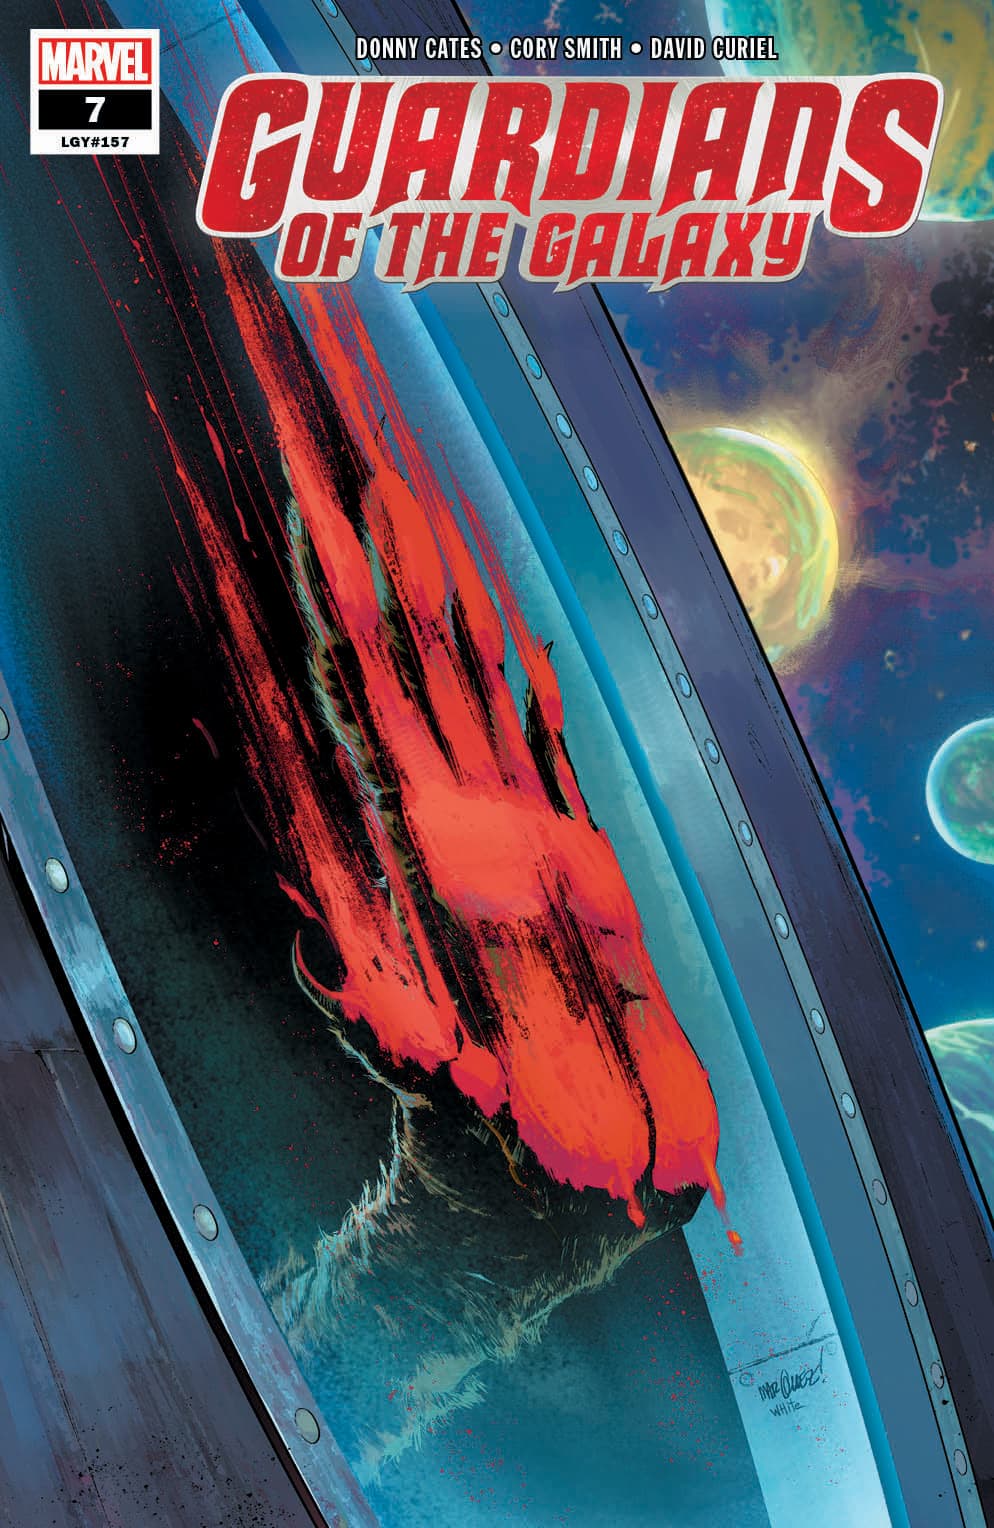 GUARDIANS OF THE GALAXY #7